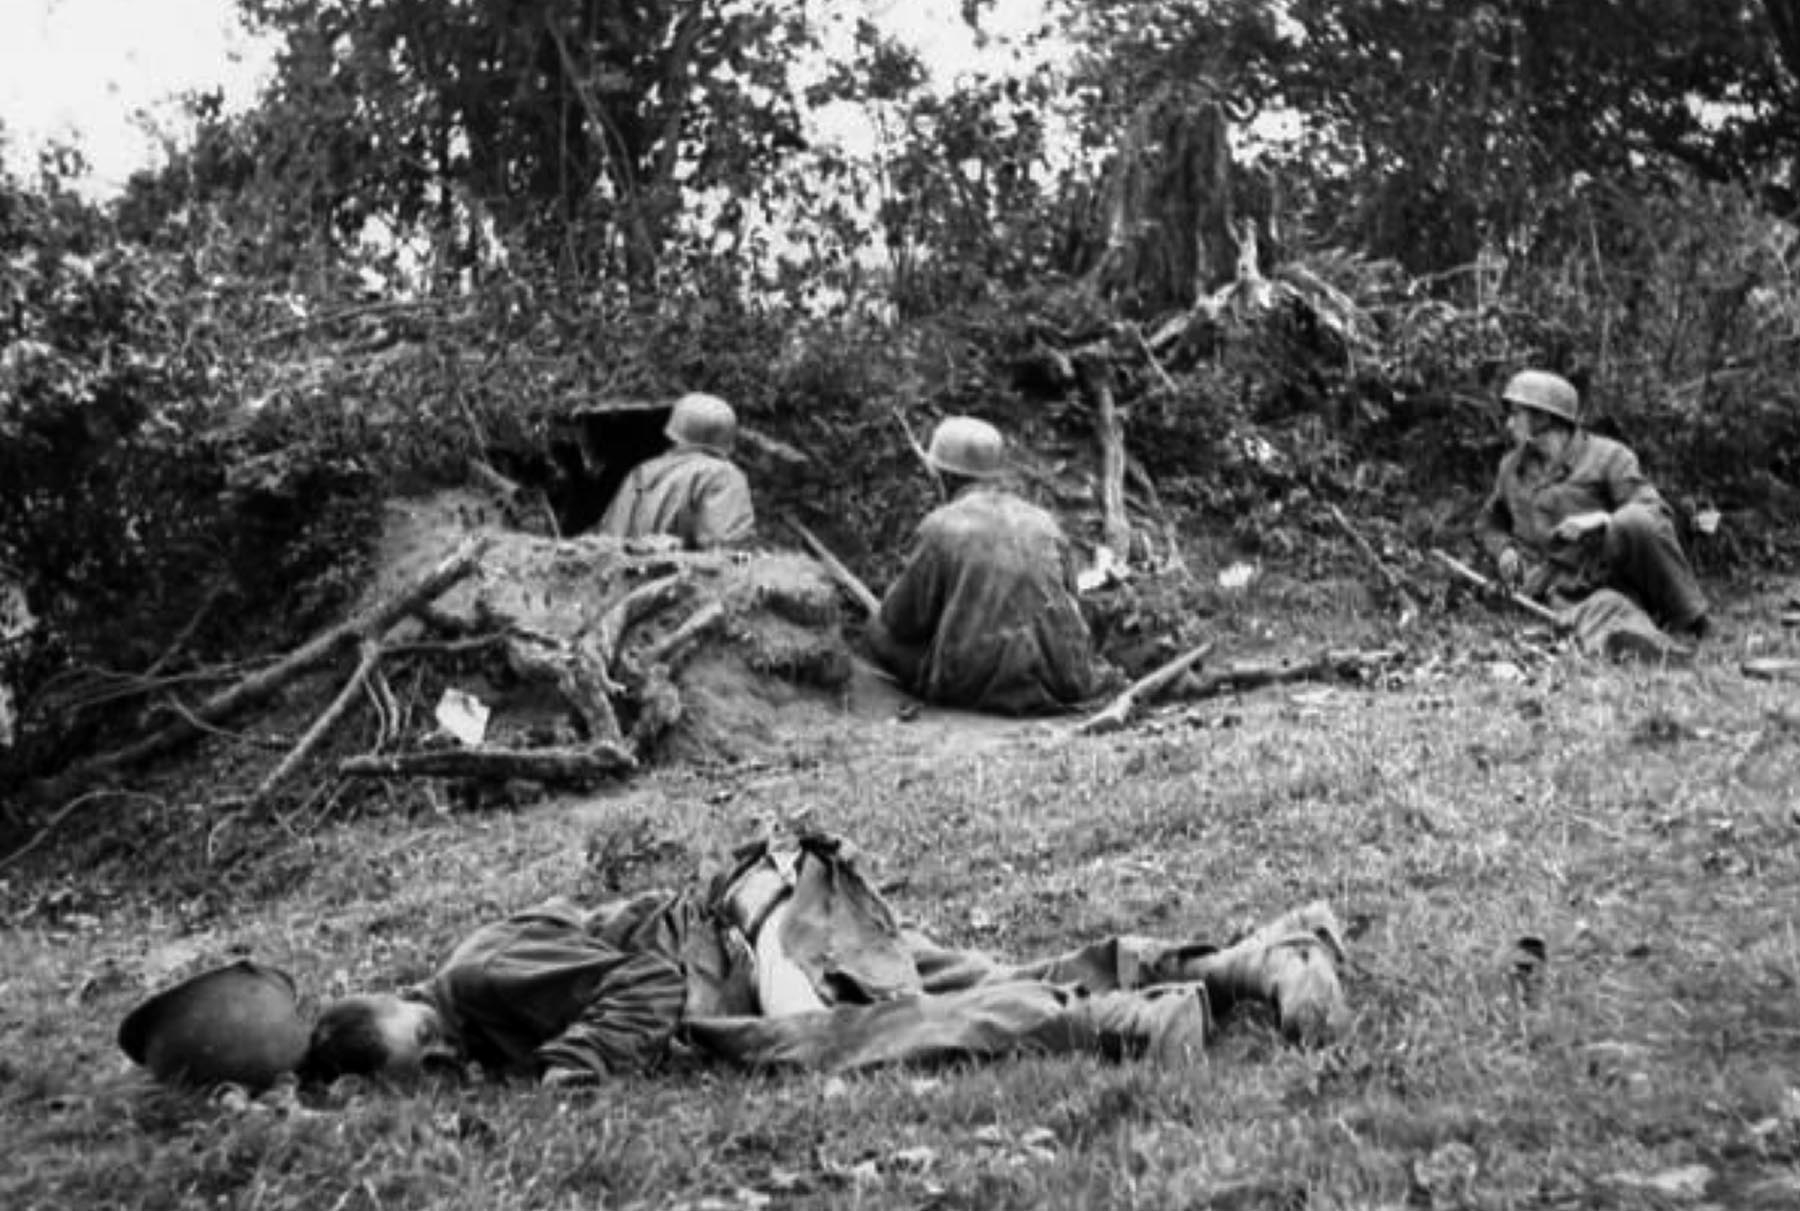 With the body of a dead American soldier lying nearby, three elite German paratroopers wait quietly in a well concealed defensive position along a Norman hedgerow. German machine guns and artillery were often pre-sighted to catch American and British troops as they came into view at the edge of a hedgerow.